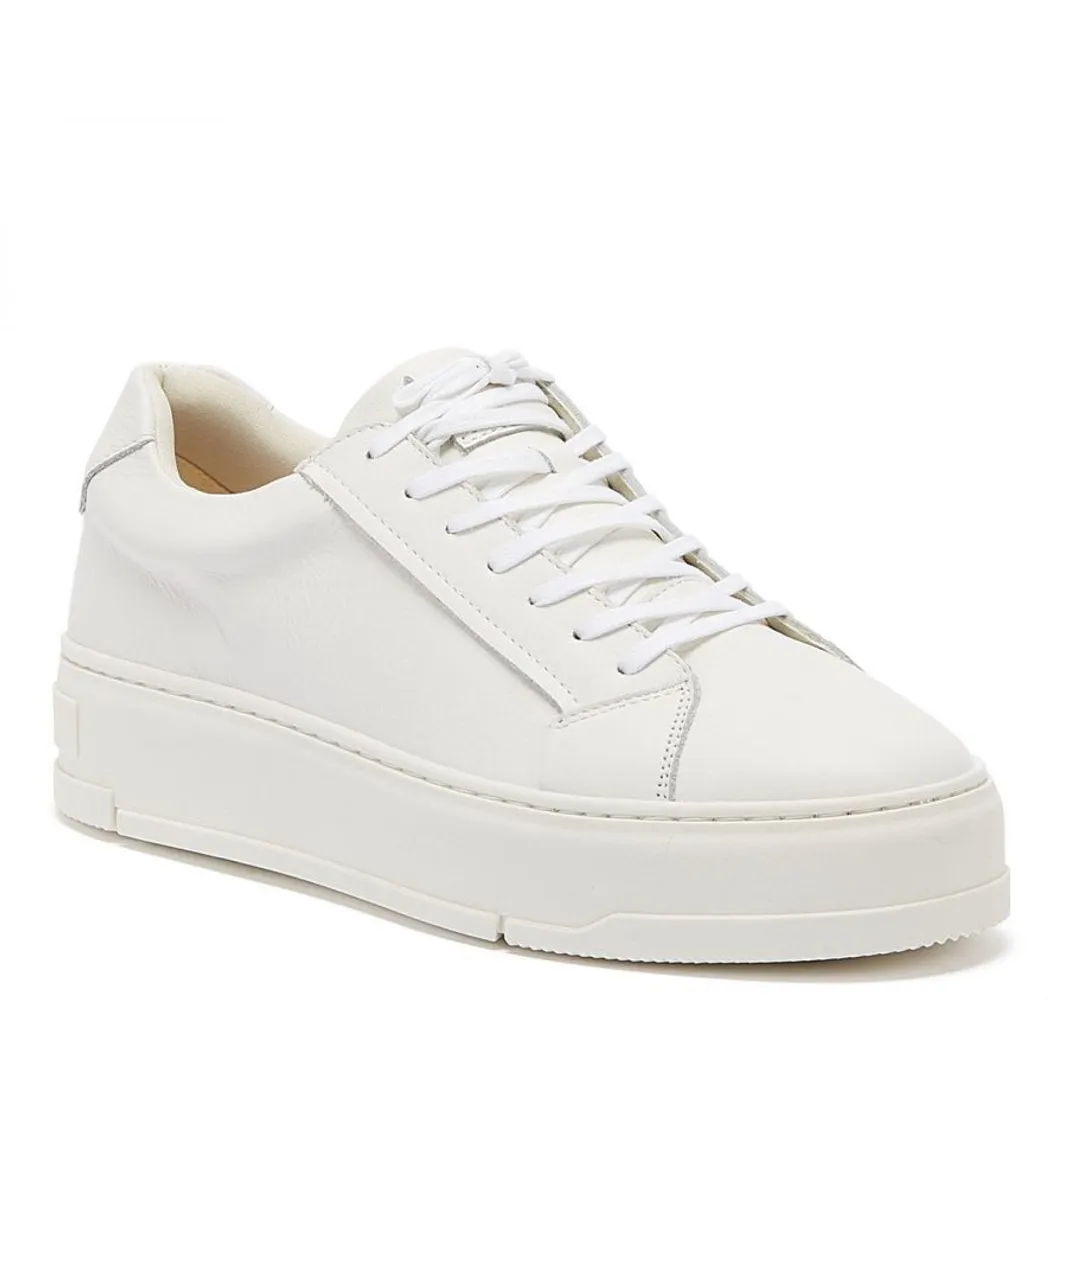 Vagabond Judy Leather Womens Trainers - (White) Rubber